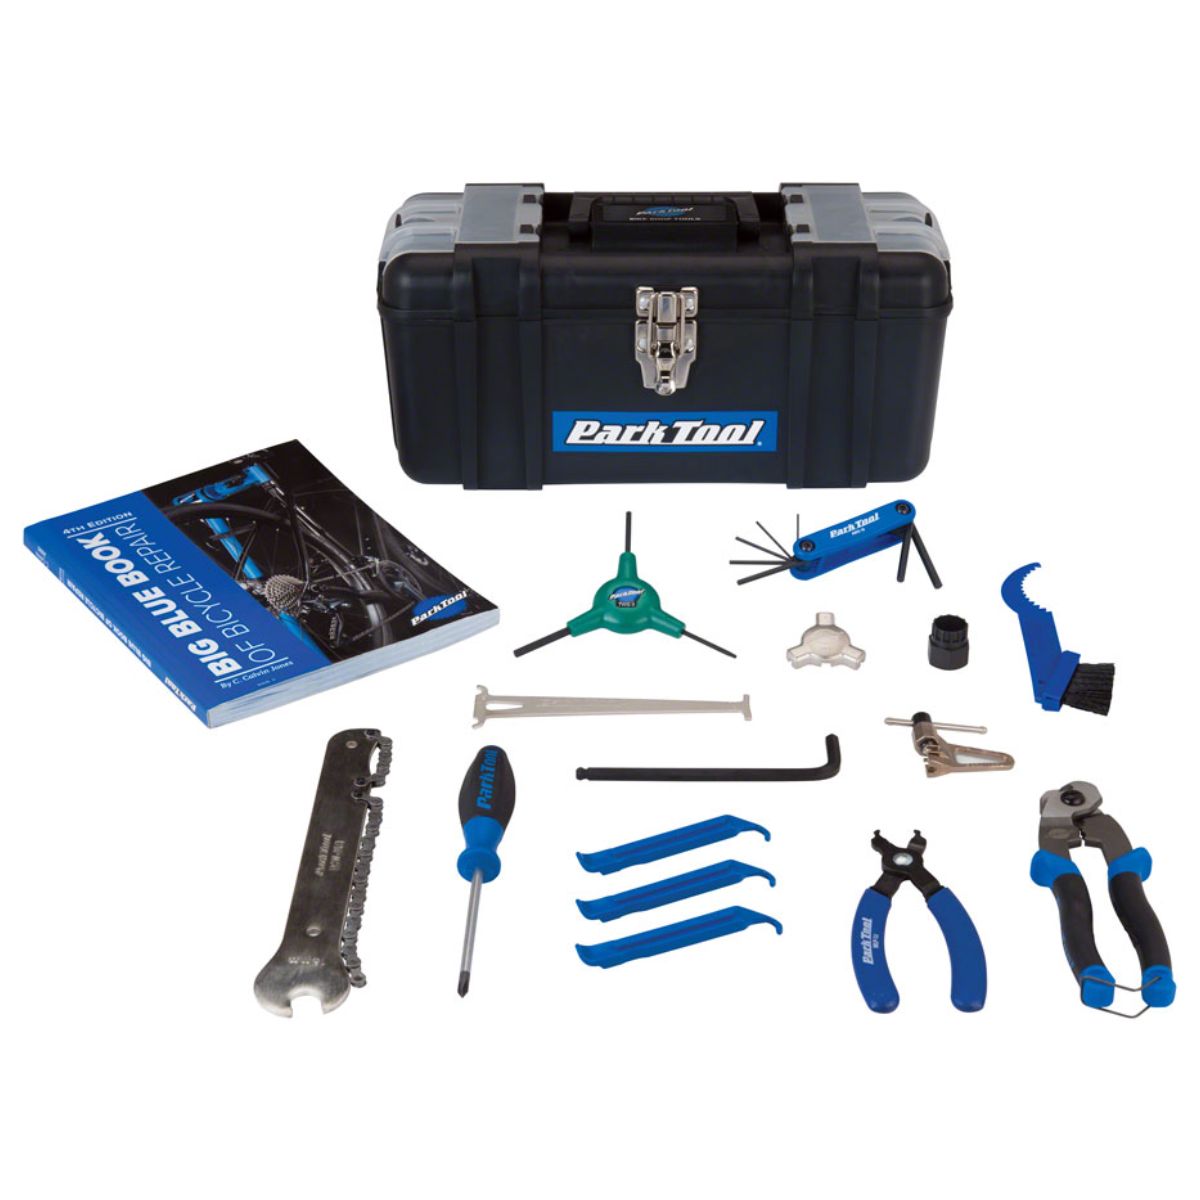 Coffre d'outils Park Tool, sk-4, 15 outils